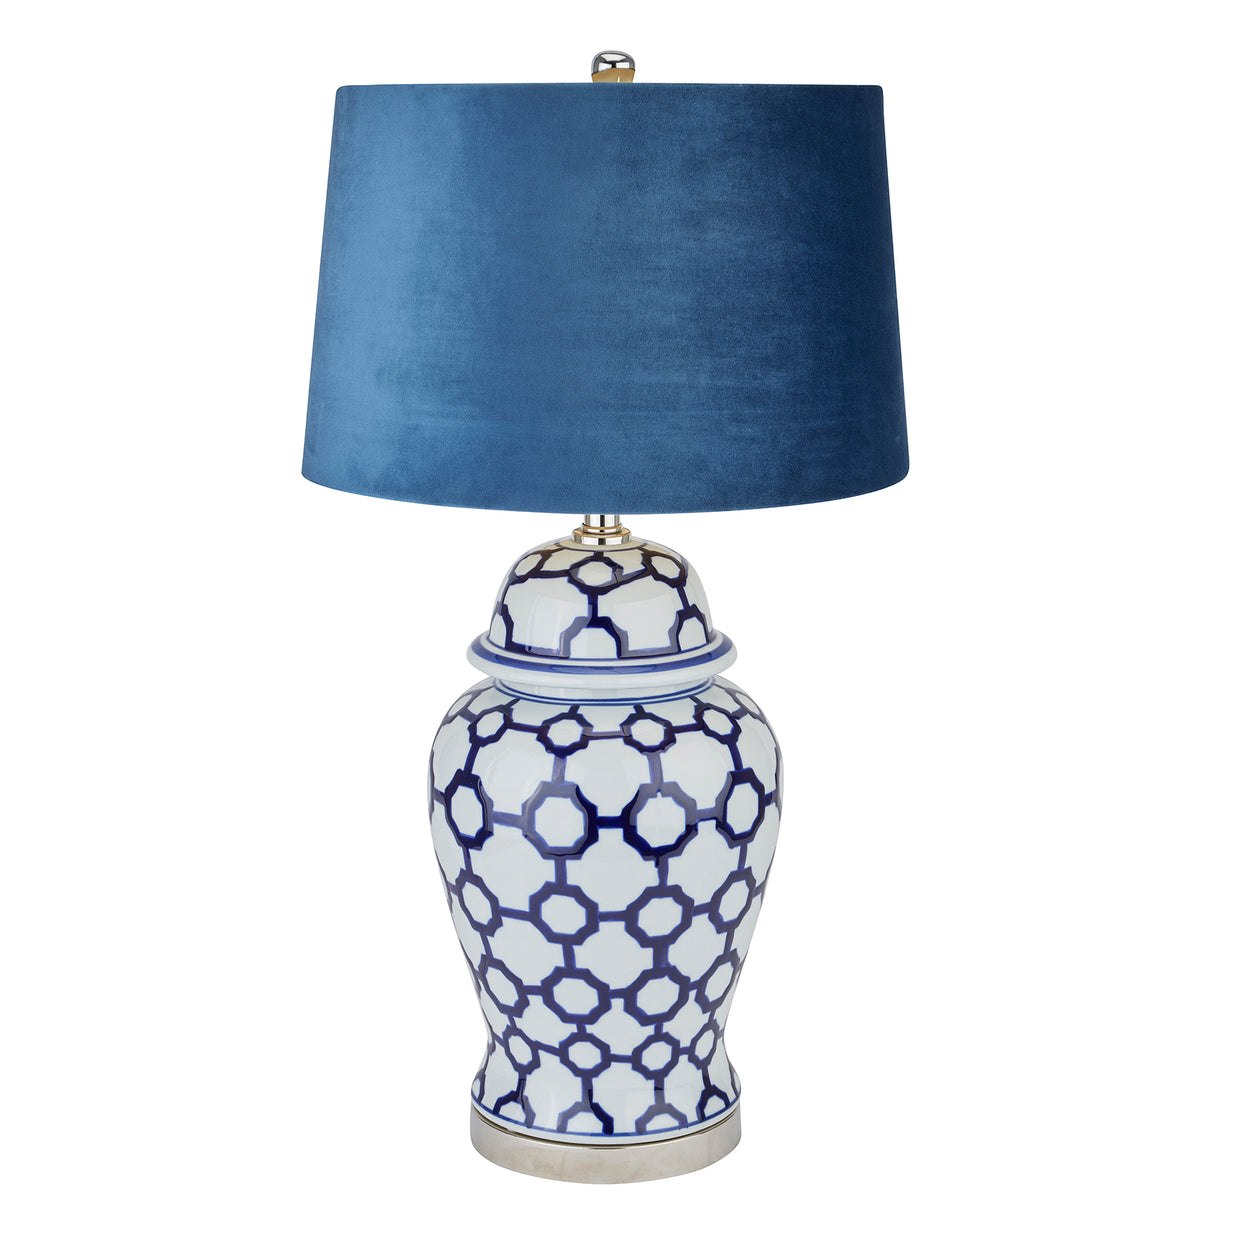 Acanthus Ceramic Tyable Lamp With Blue Velvet Shade - Blue And White For Hill Interiors - HIL-22066